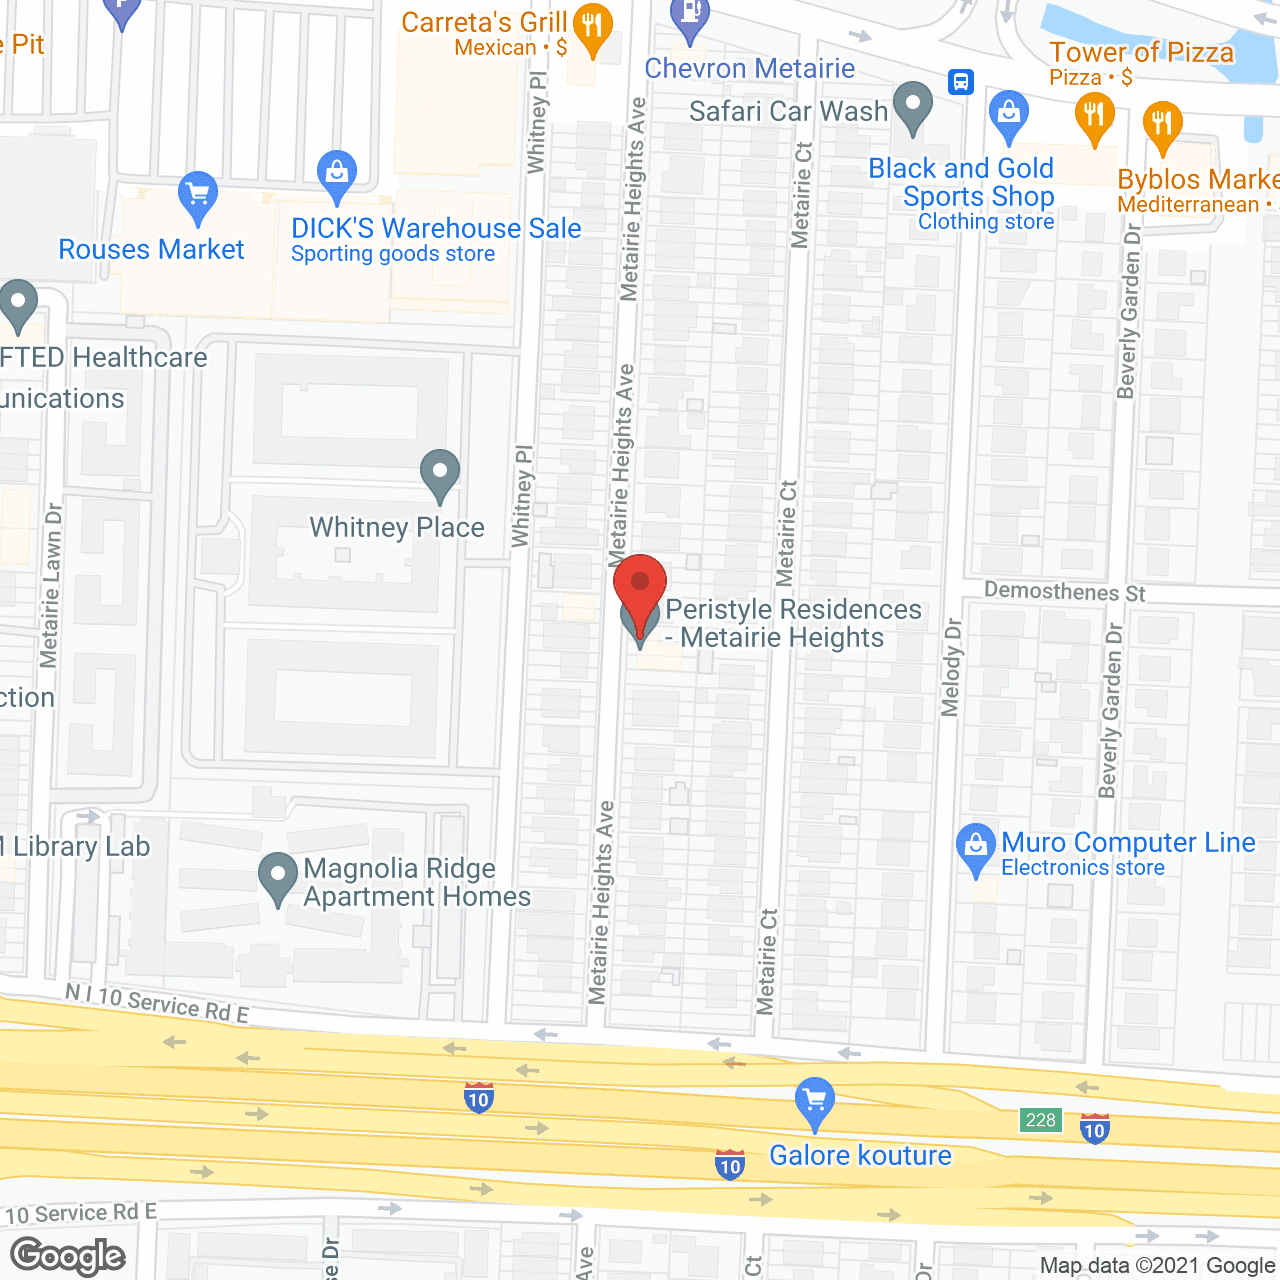 Metairie Heights in google map